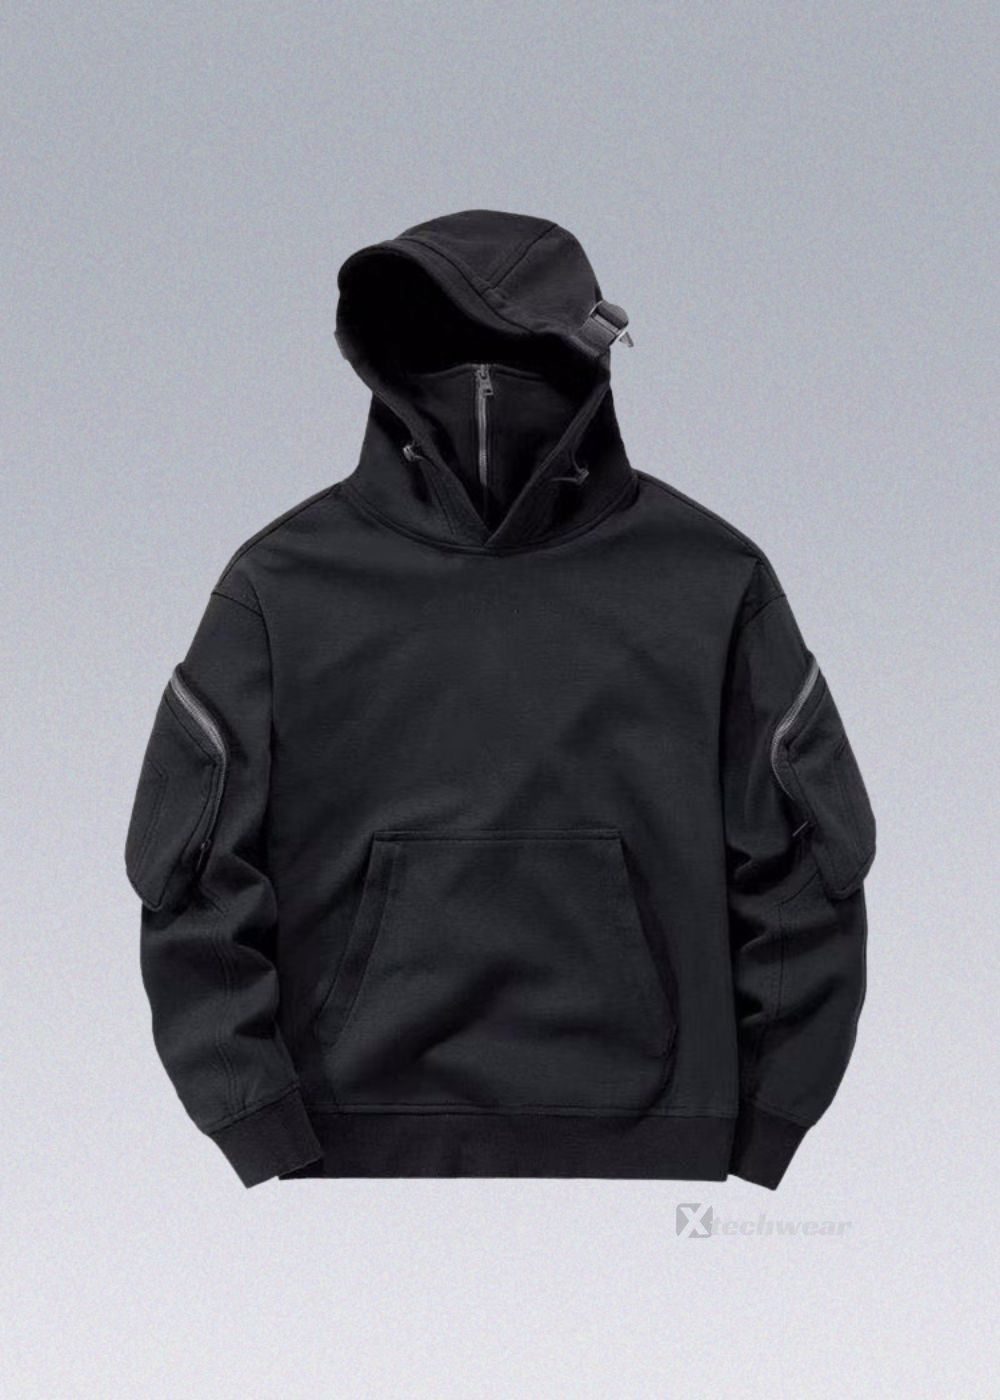 AIR BORNE Warcore Shelter Hoodies - Affordable Techwear - X